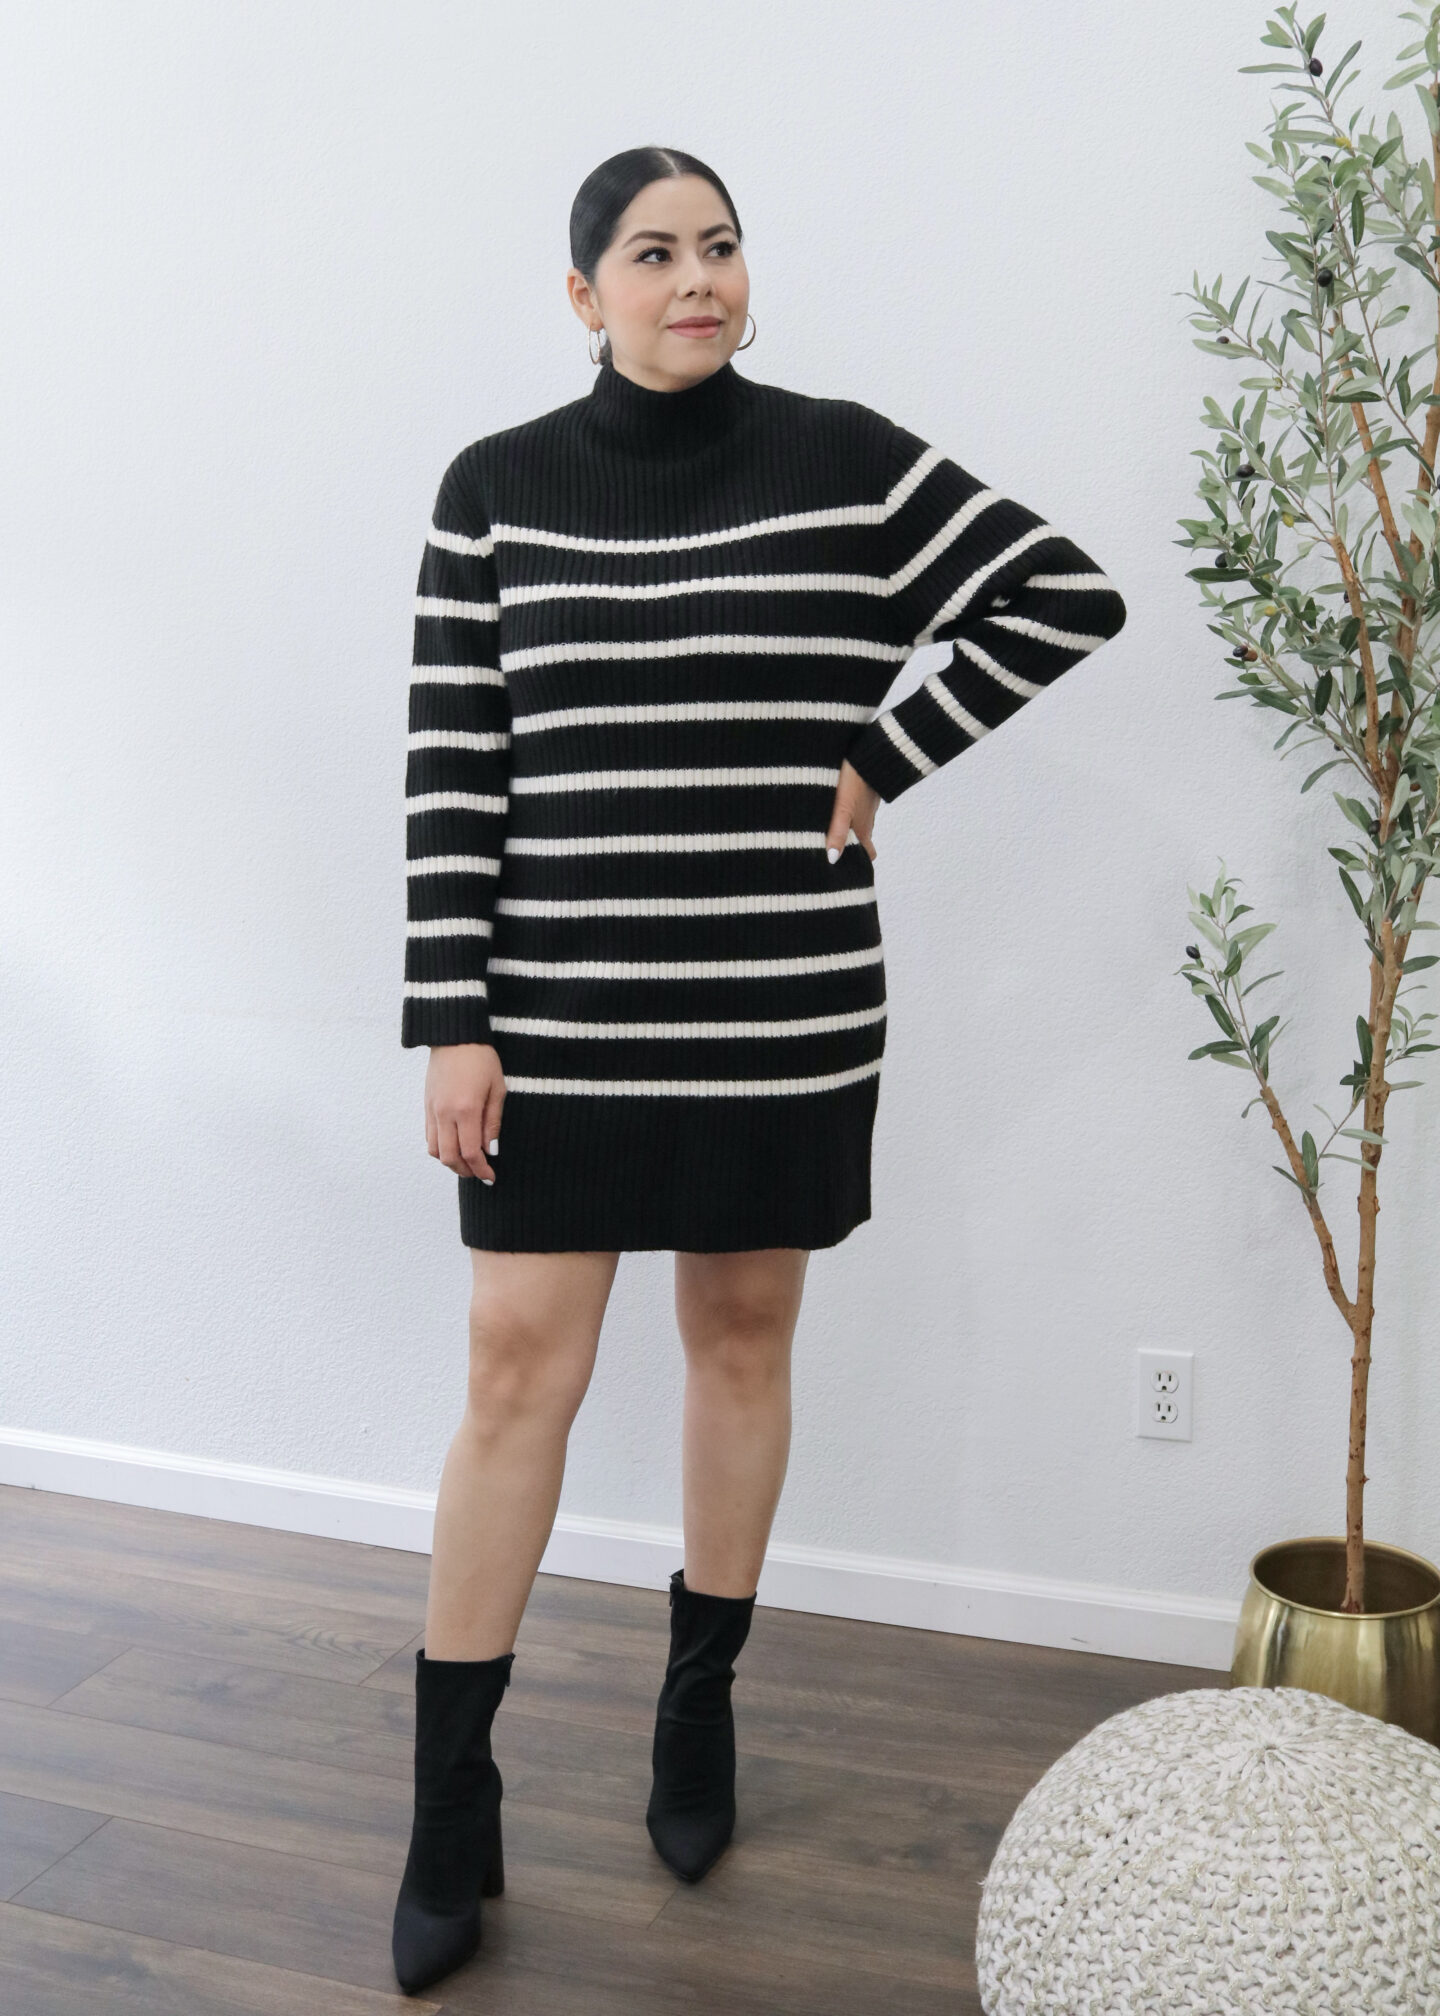 Winter Style: Sweater Dresses, winter style with sweater dresses, striped turtleneck dress